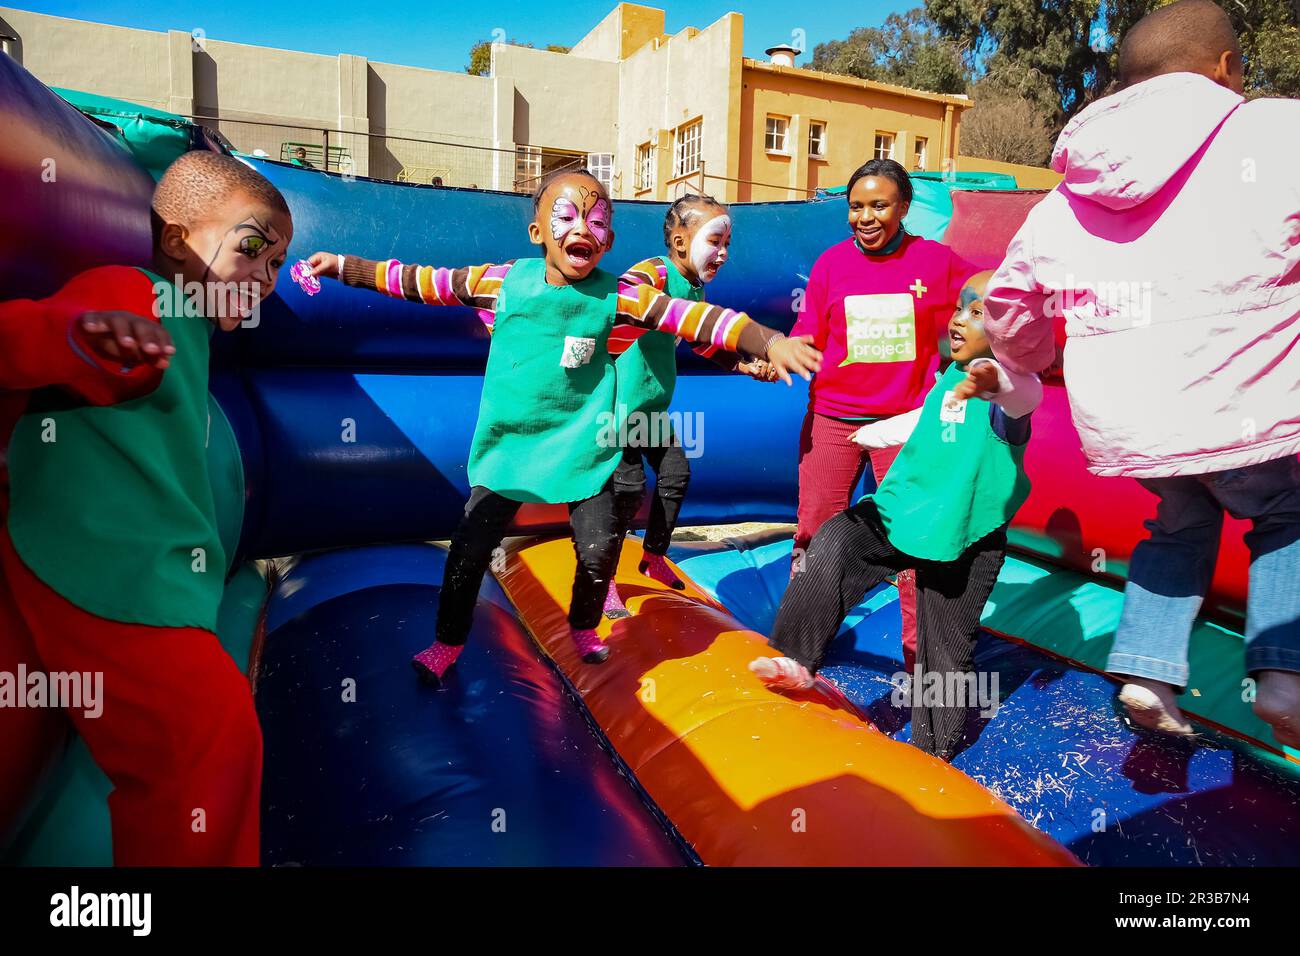 Young African Preschool children having fun on a jumping castle on the playground Stock Photo